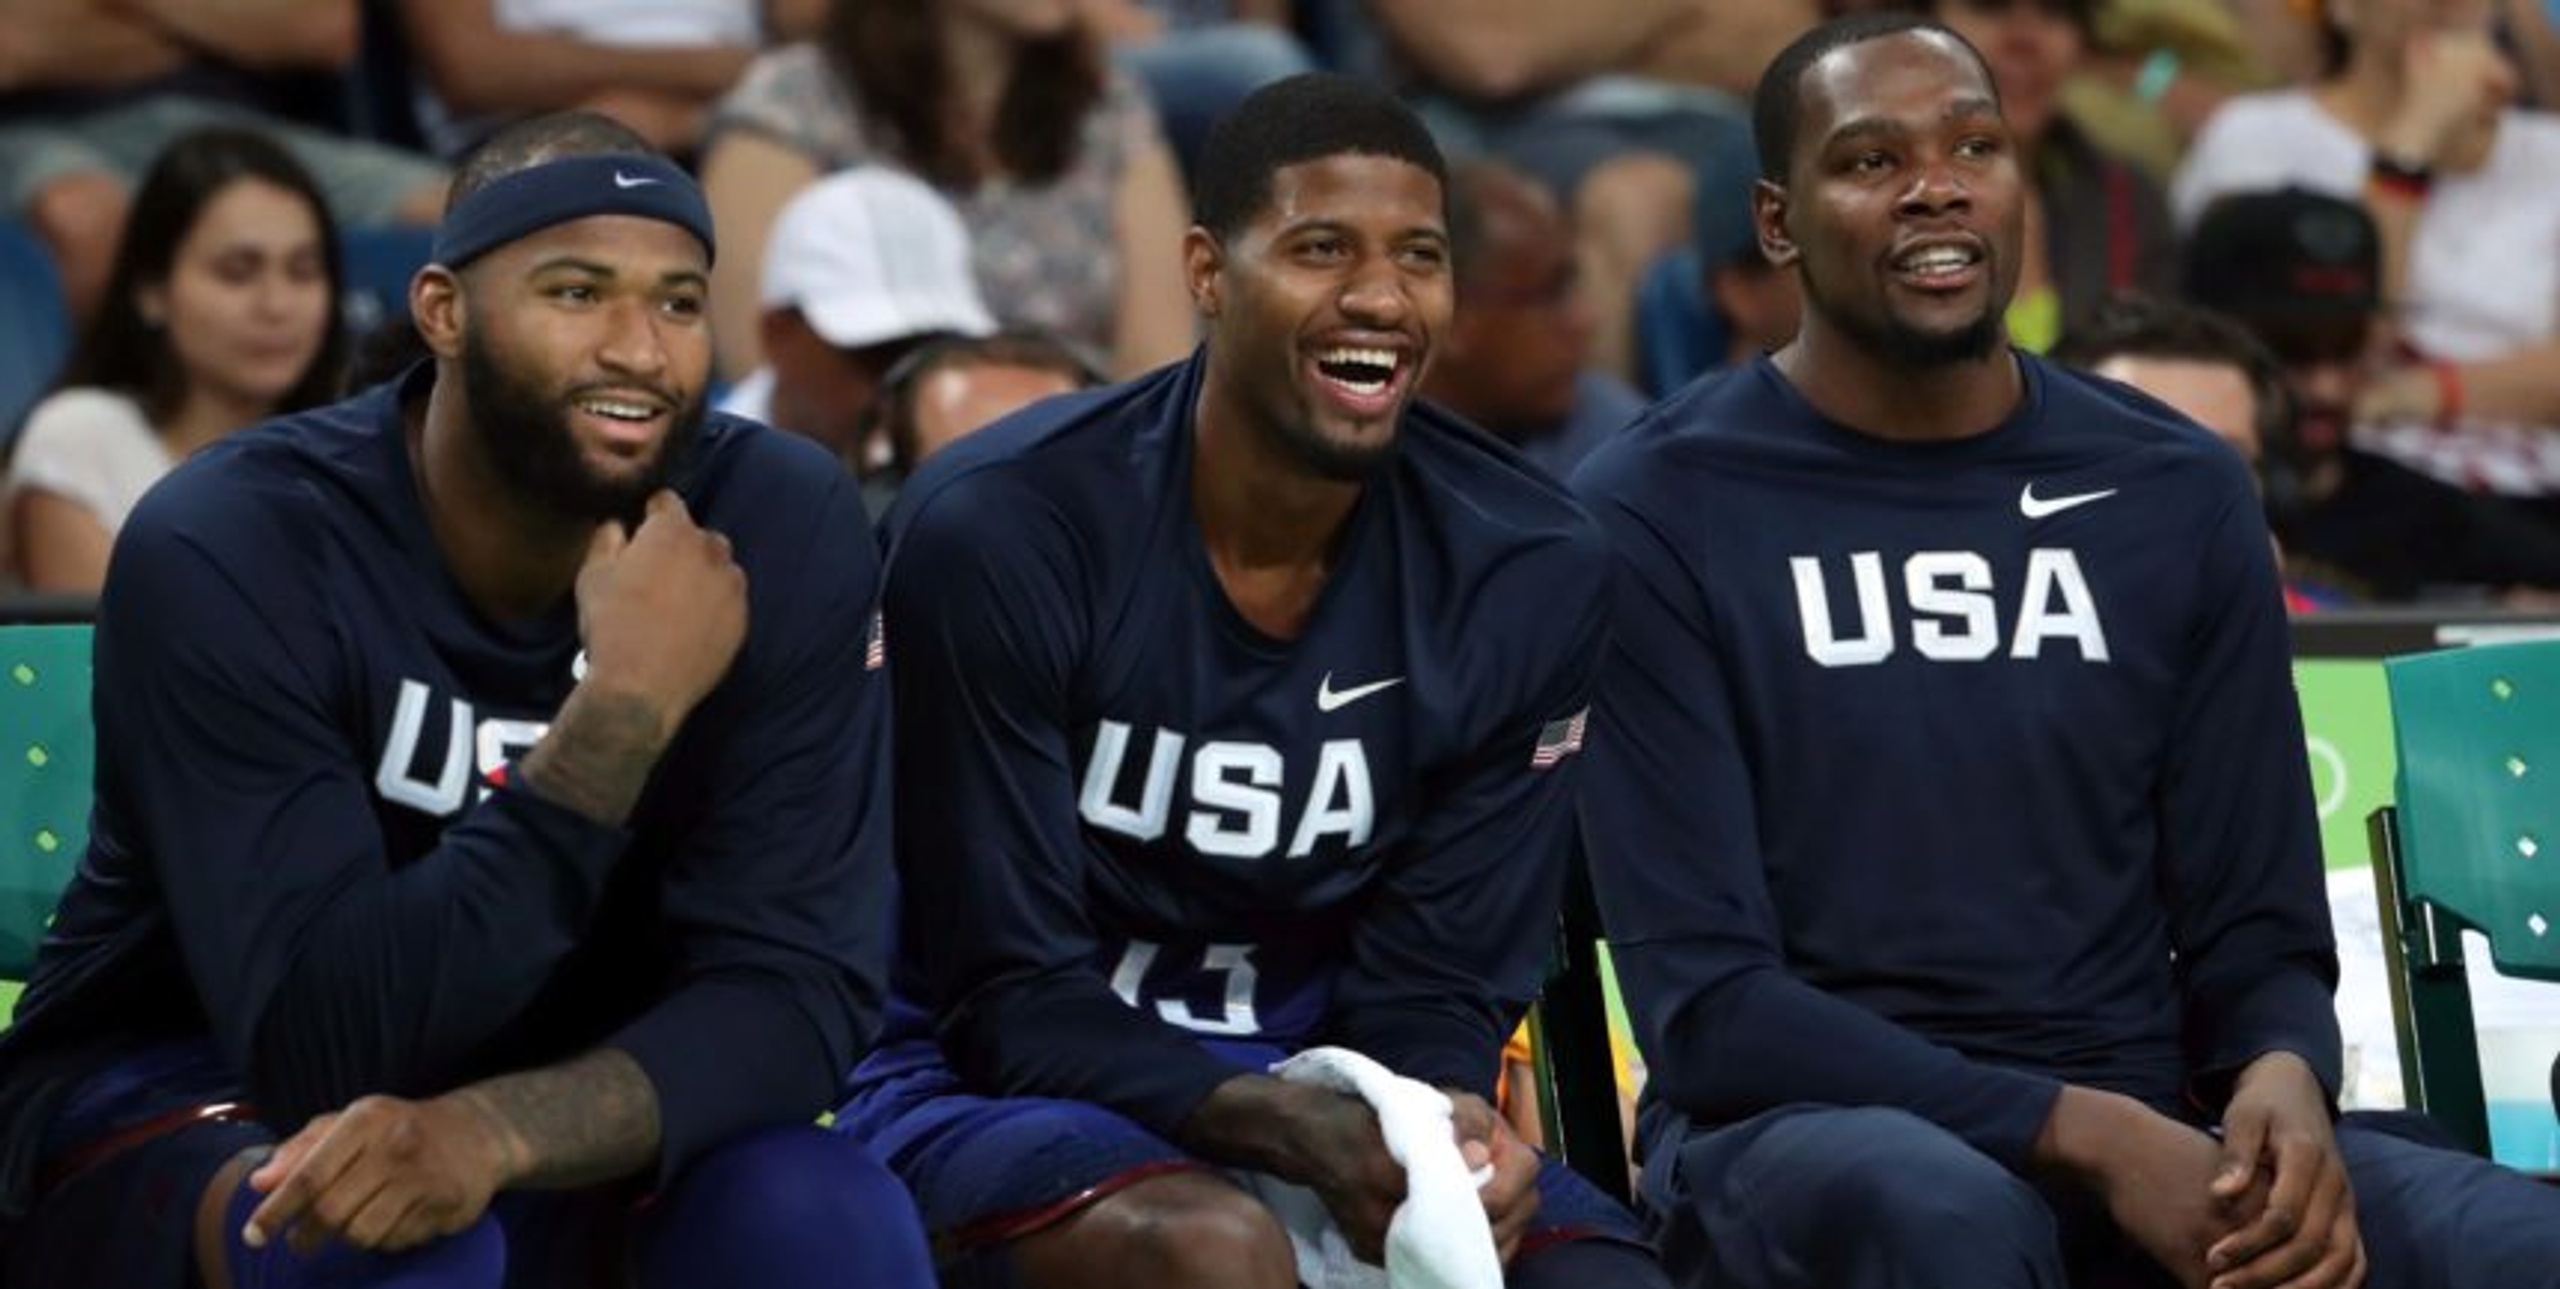 Team USA will open 2021 Olympics against France